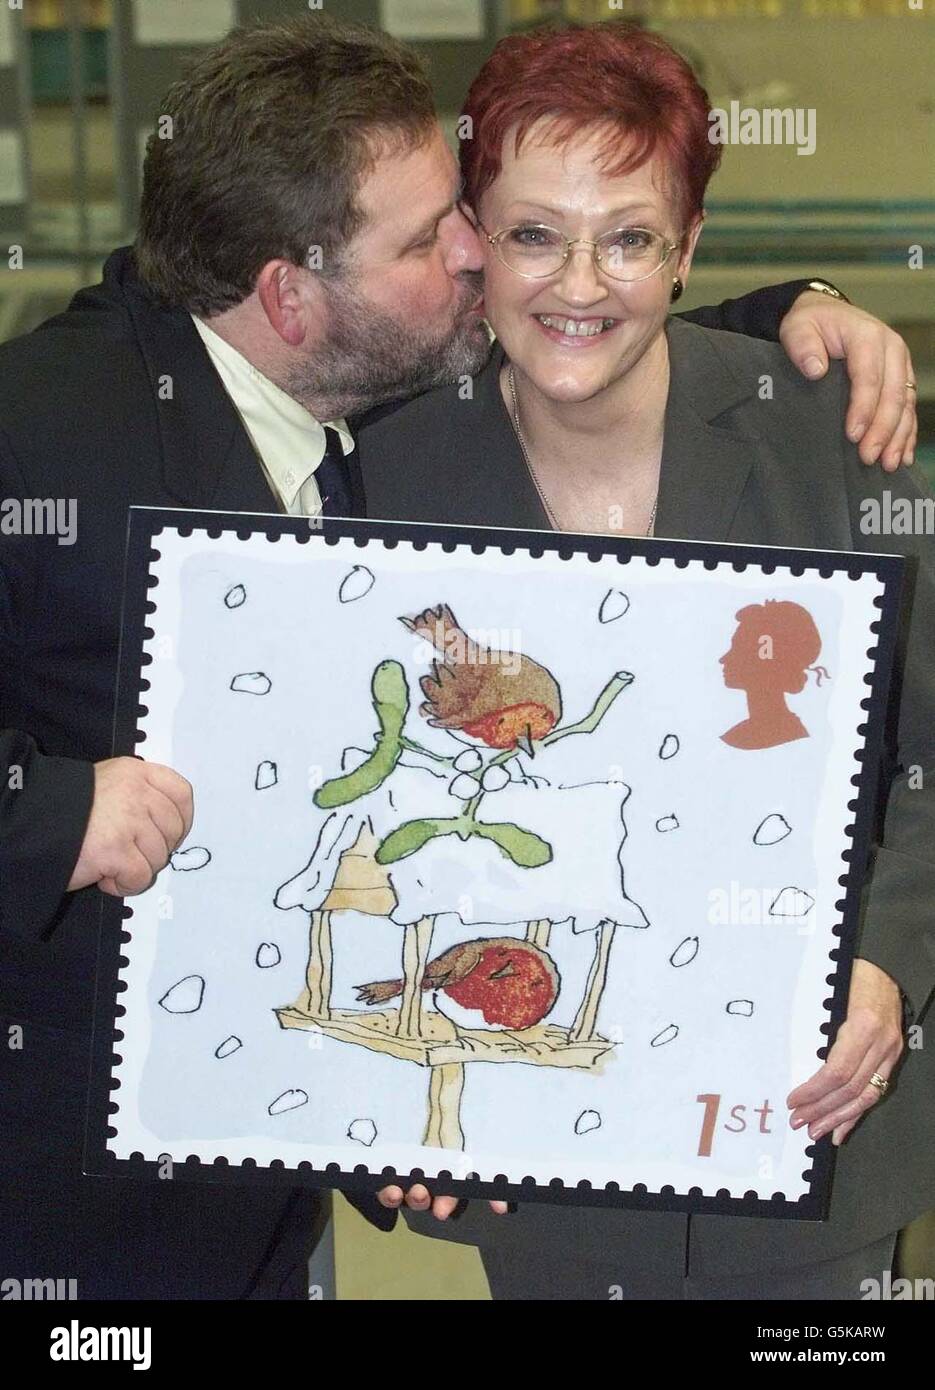 Carol Mitchell from Newcastle with her husband Ed, the secretary who was sent out by her boss to buy a stamp, celebrates in Gateshead, Newcastle upon Tyne, after she scooped 1 million in a Royal Mail promotion. * ..... The nationwide 1st Class Christmas Stamp promotion guaranteed 1 million to the finder of a special stamp. Although asked to buy just one stamp Carol, 50, decided to buy a book while in the shop and after keeping the remaining stamps one turned out to be the mystery million pound winner. Stock Photo